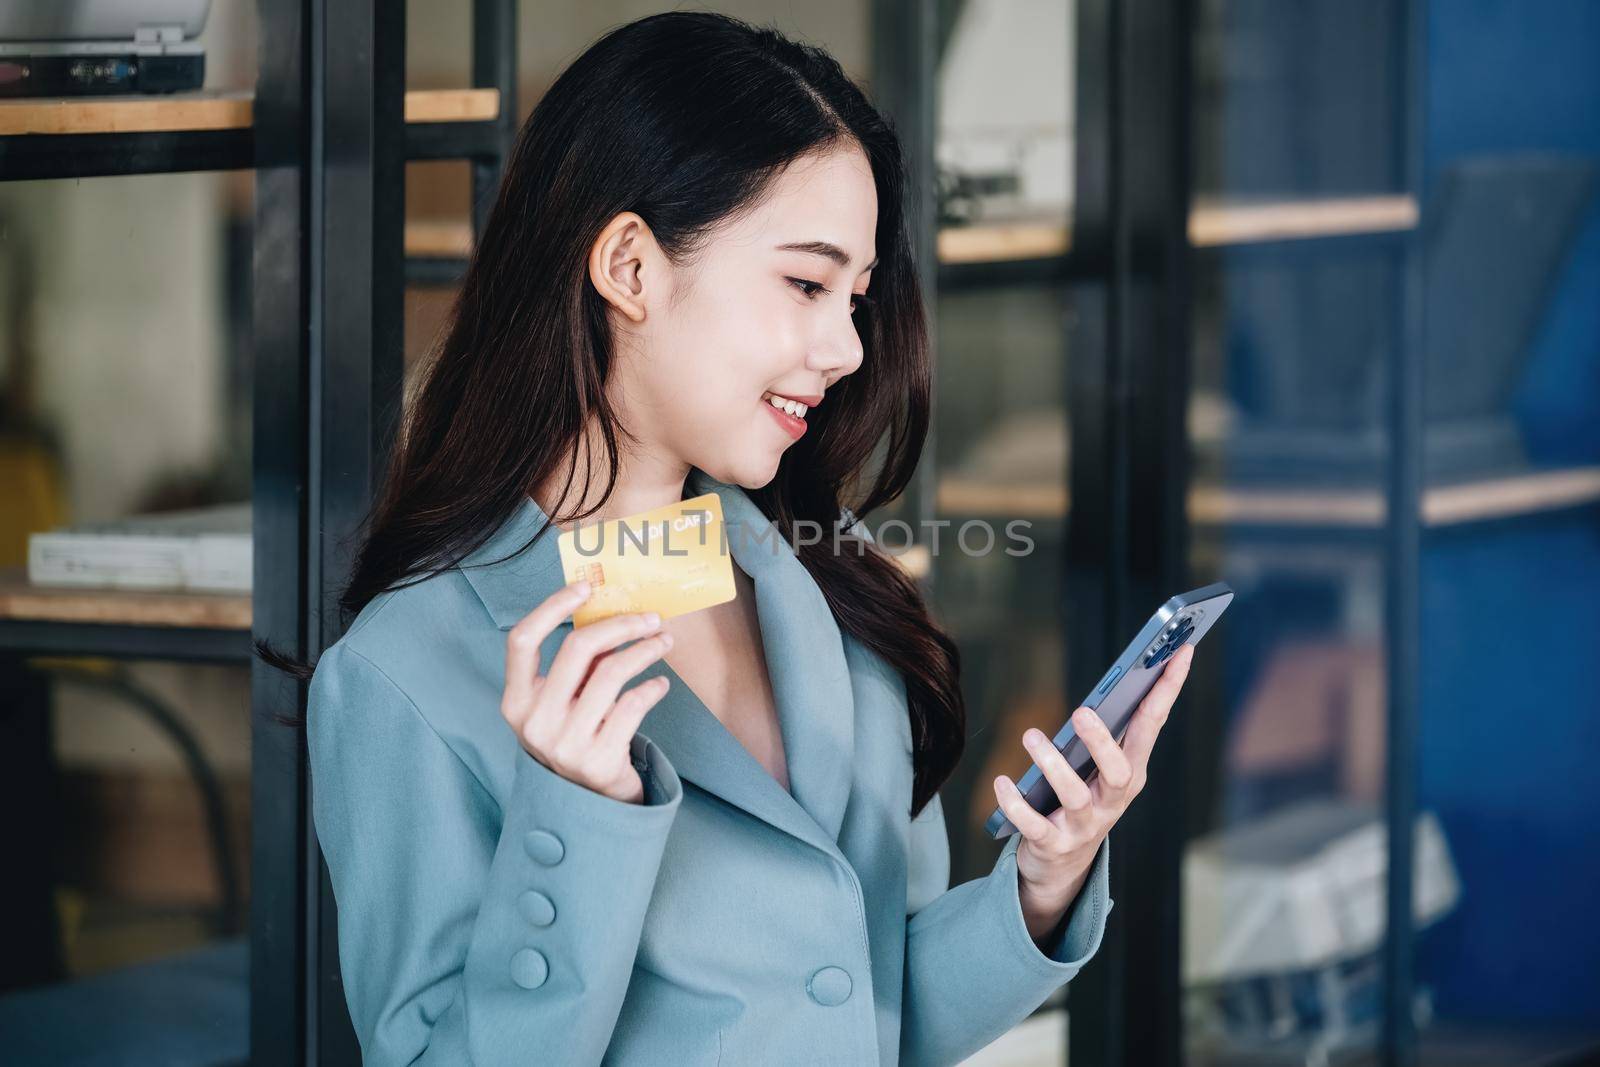 Online Shopping and Internet Payments, Beautiful Asian women are using their mobile phones and credit cards to shop online or conduct errands in the digital world. by Manastrong